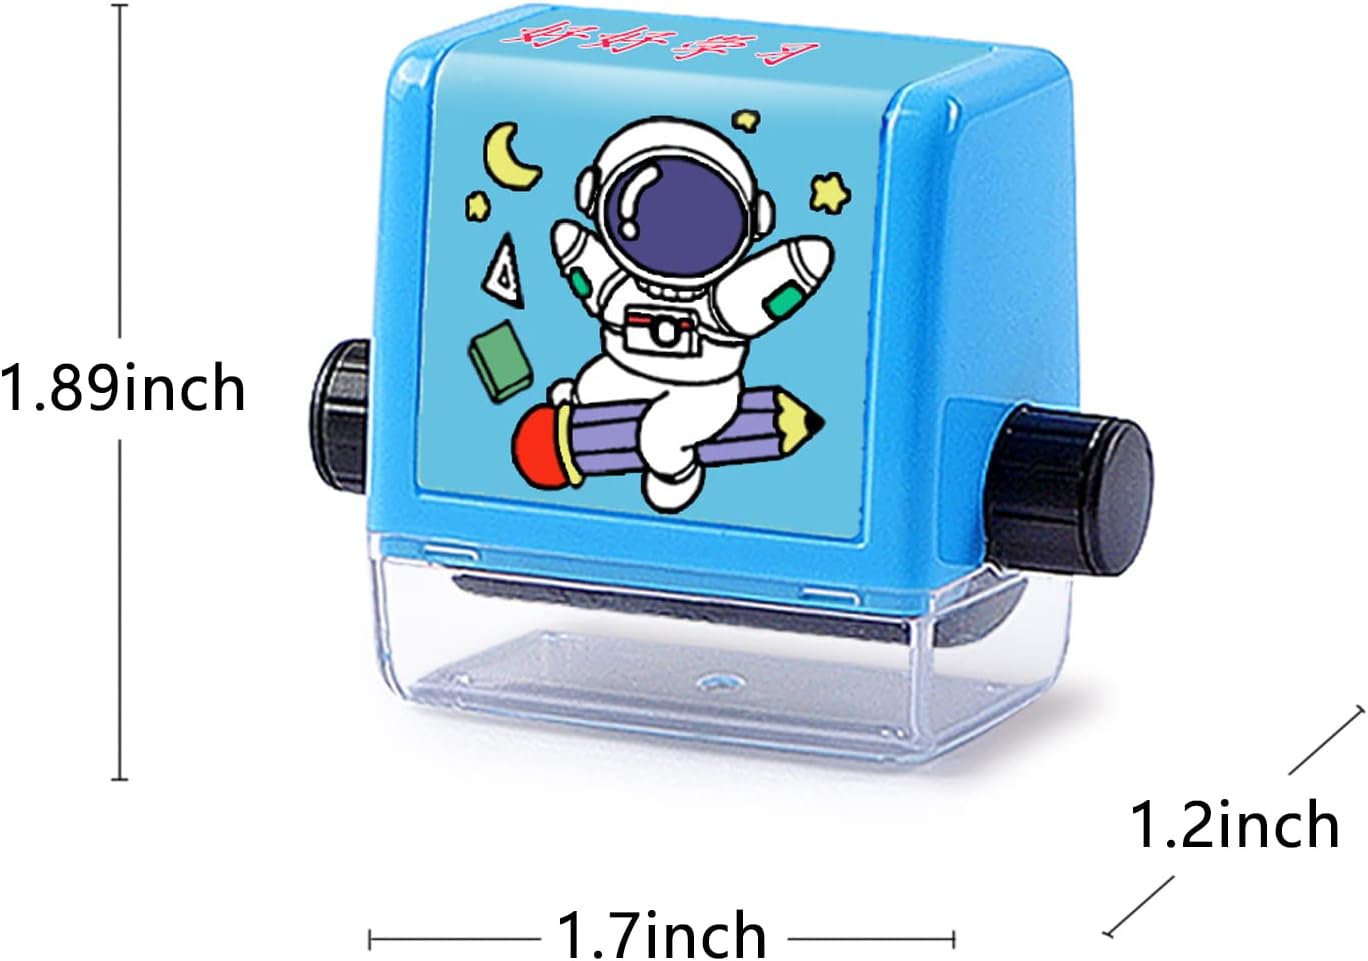 4PCS Smart Math Roller Stamps,Teaching Stamps for Kids,Math Practice Stamps,Addition Subtraction Multiplication Division Math Learning Stamps Within 100,for Preschool Kindergarten Classroom Supplies.